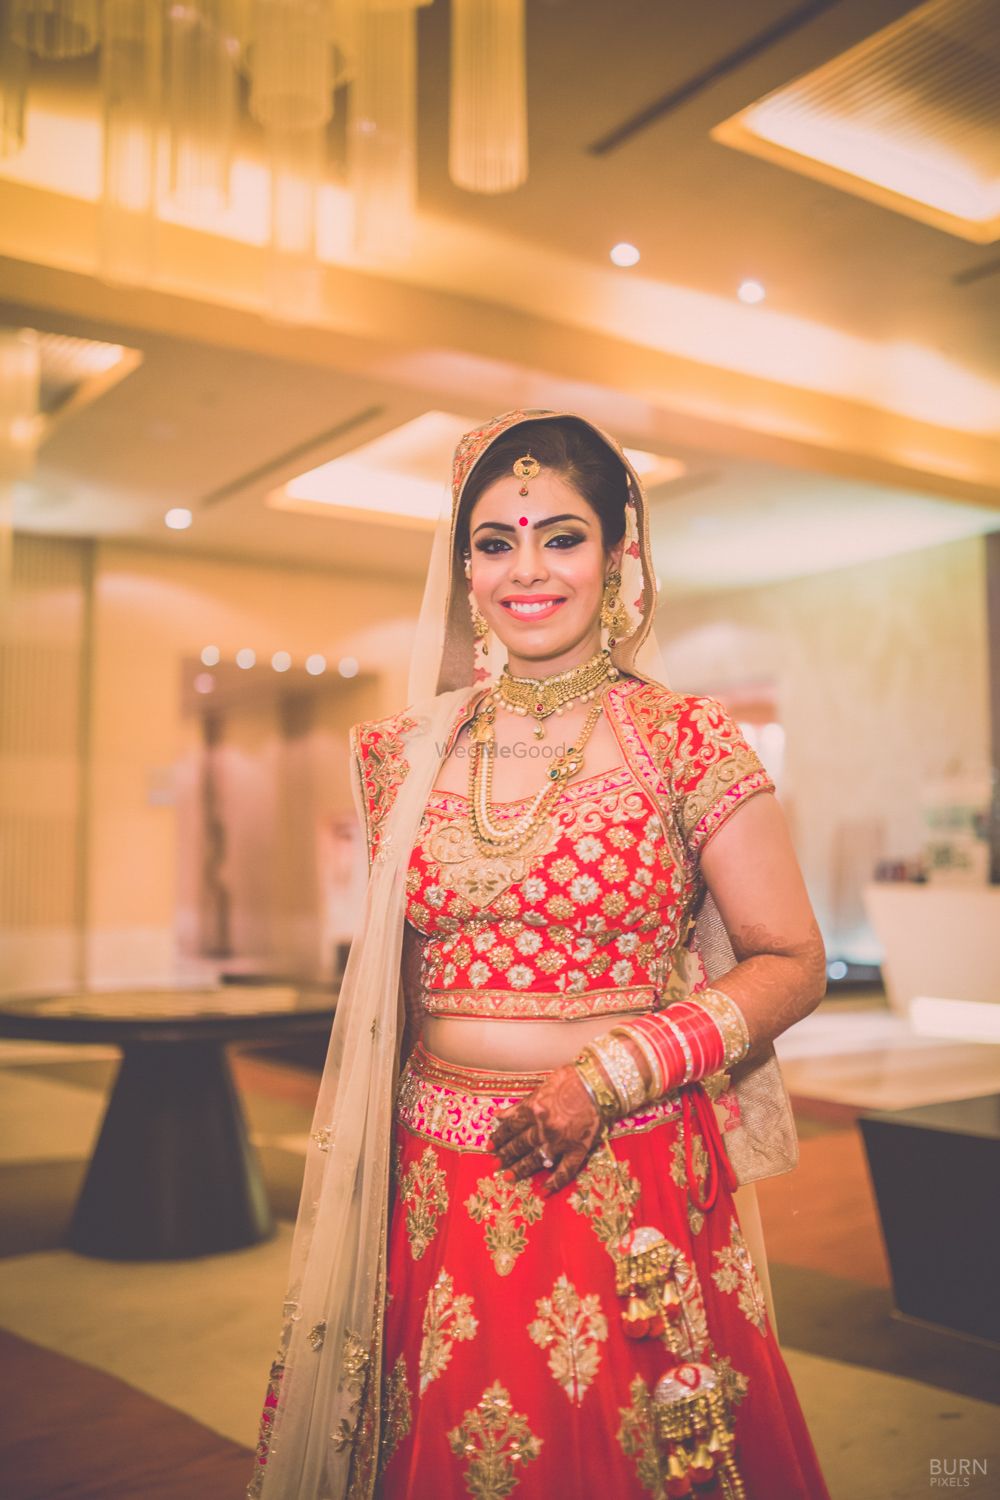 Photo of Smiling Bride in Red and Gold Lehenga